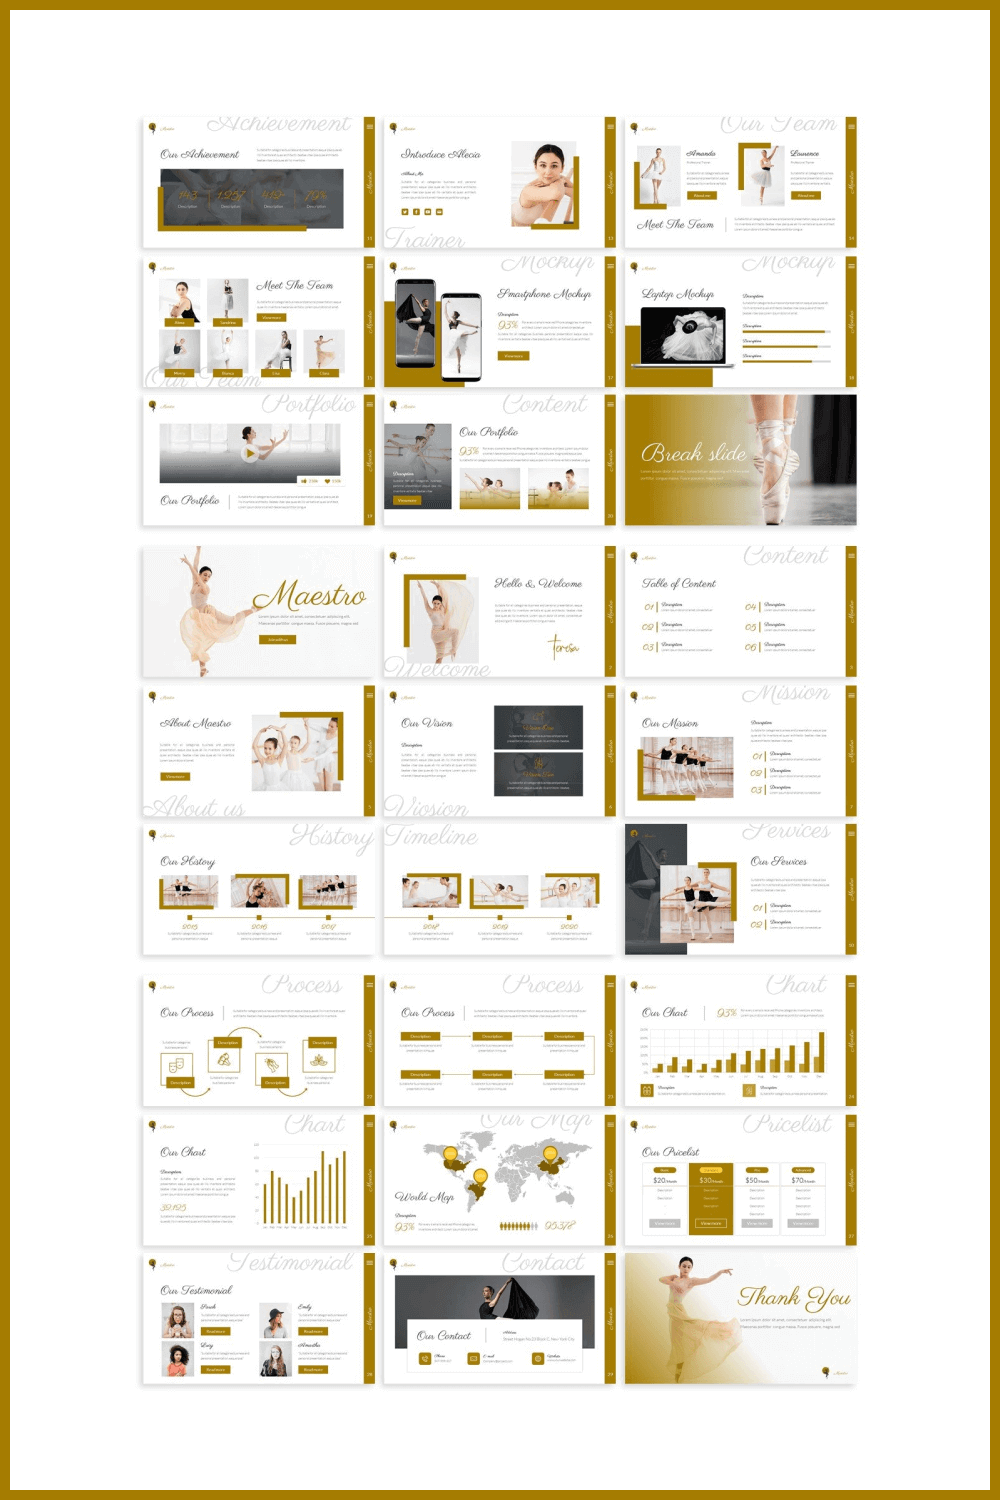 All about Maestro Ballet Powerpoint Template.